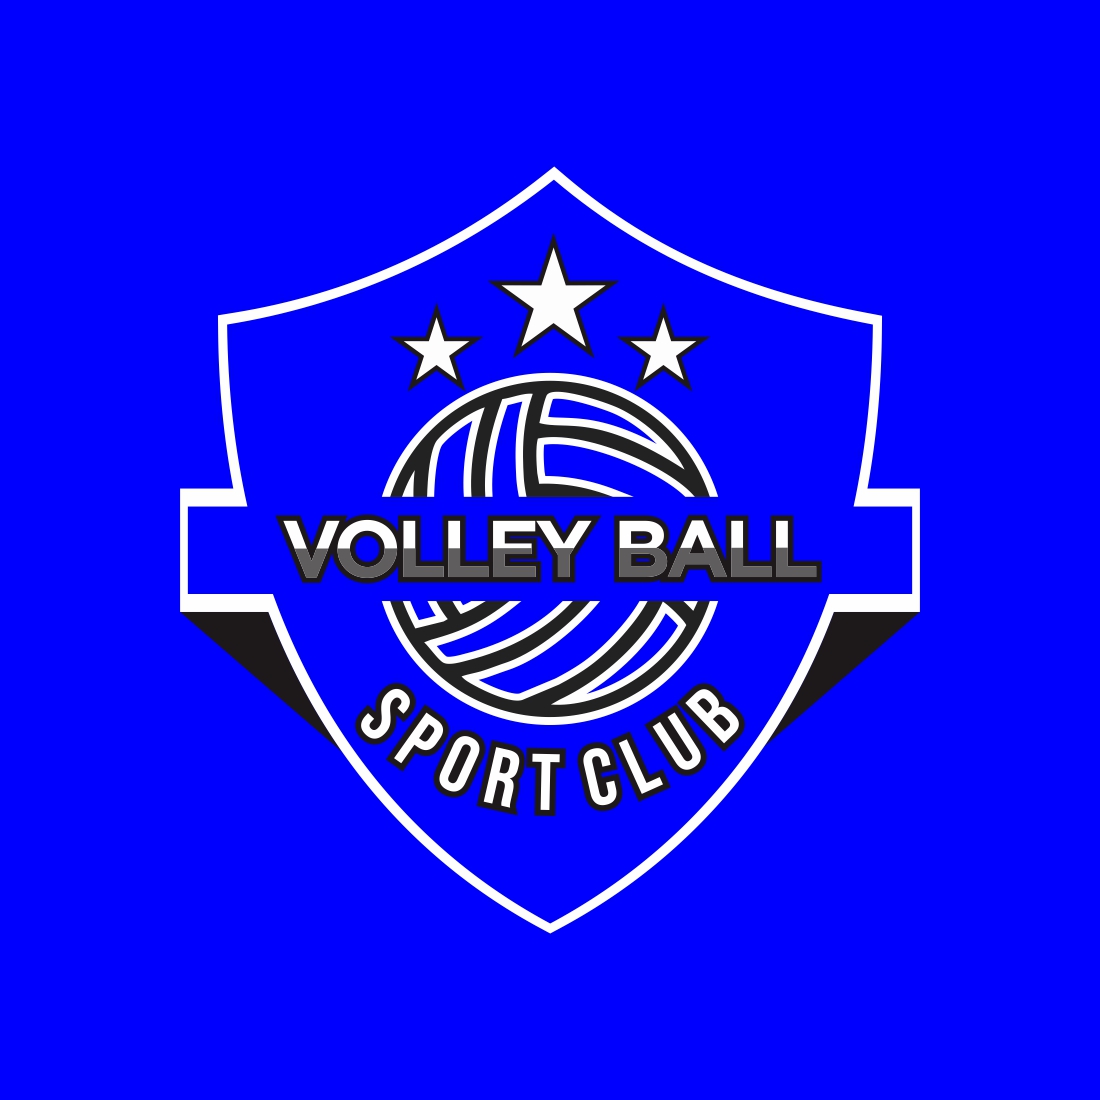 Volleyball logo design vector illustration, Emblem for volleyball club cover image.